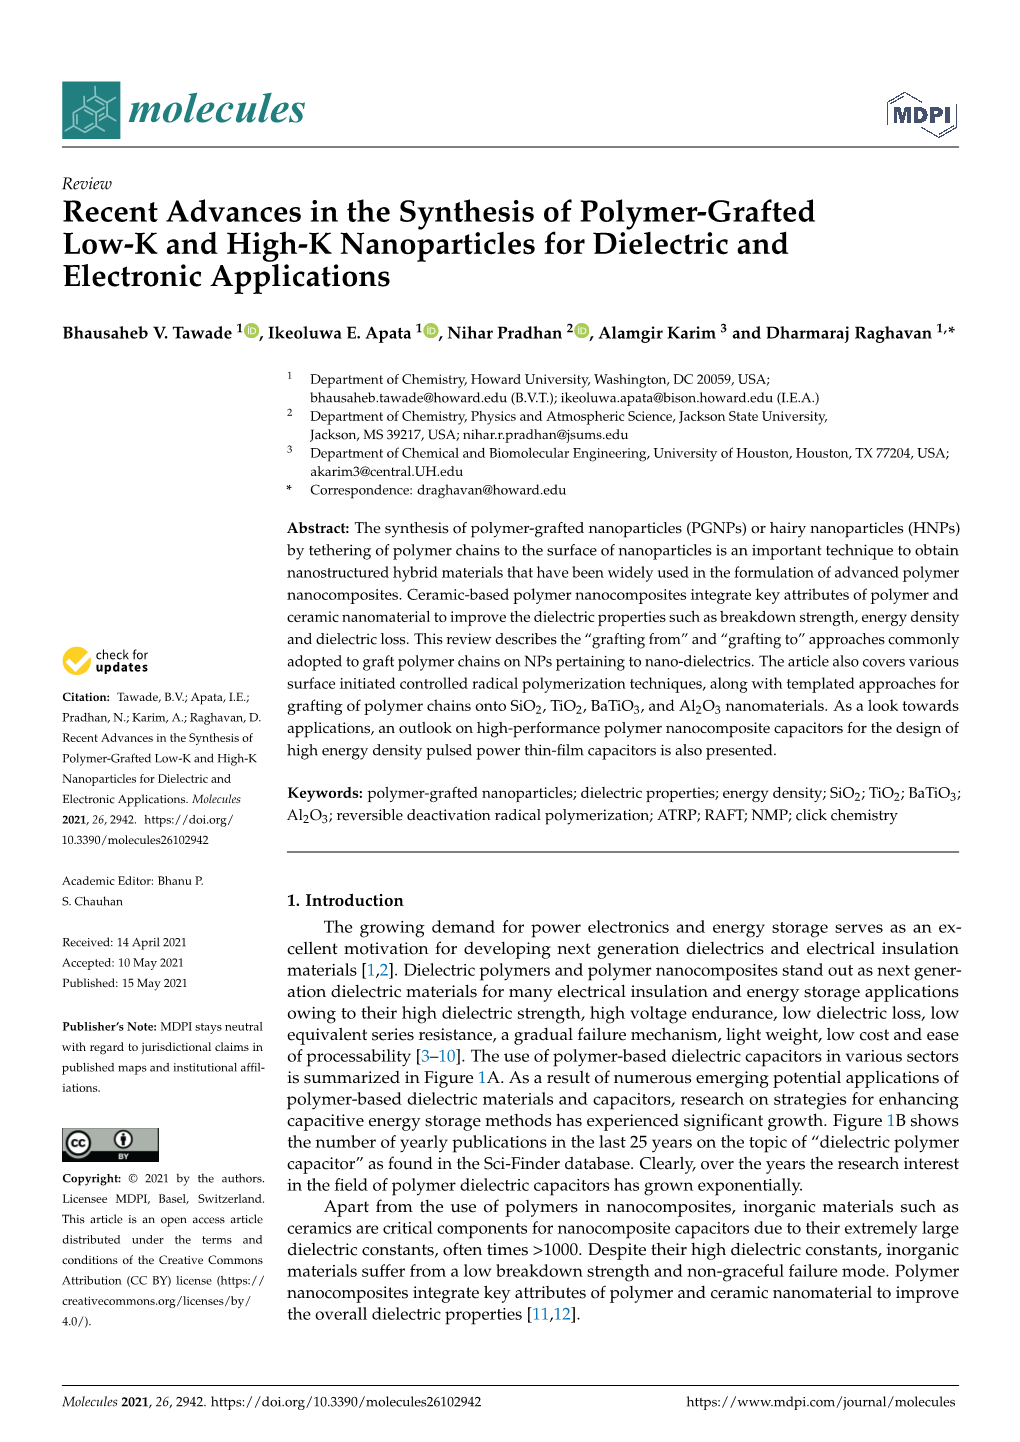 Recent Advances in the Synthesis of Polymer-Grafted Low-K and High-K Nanoparticles for Dielectric and Electronic Applications